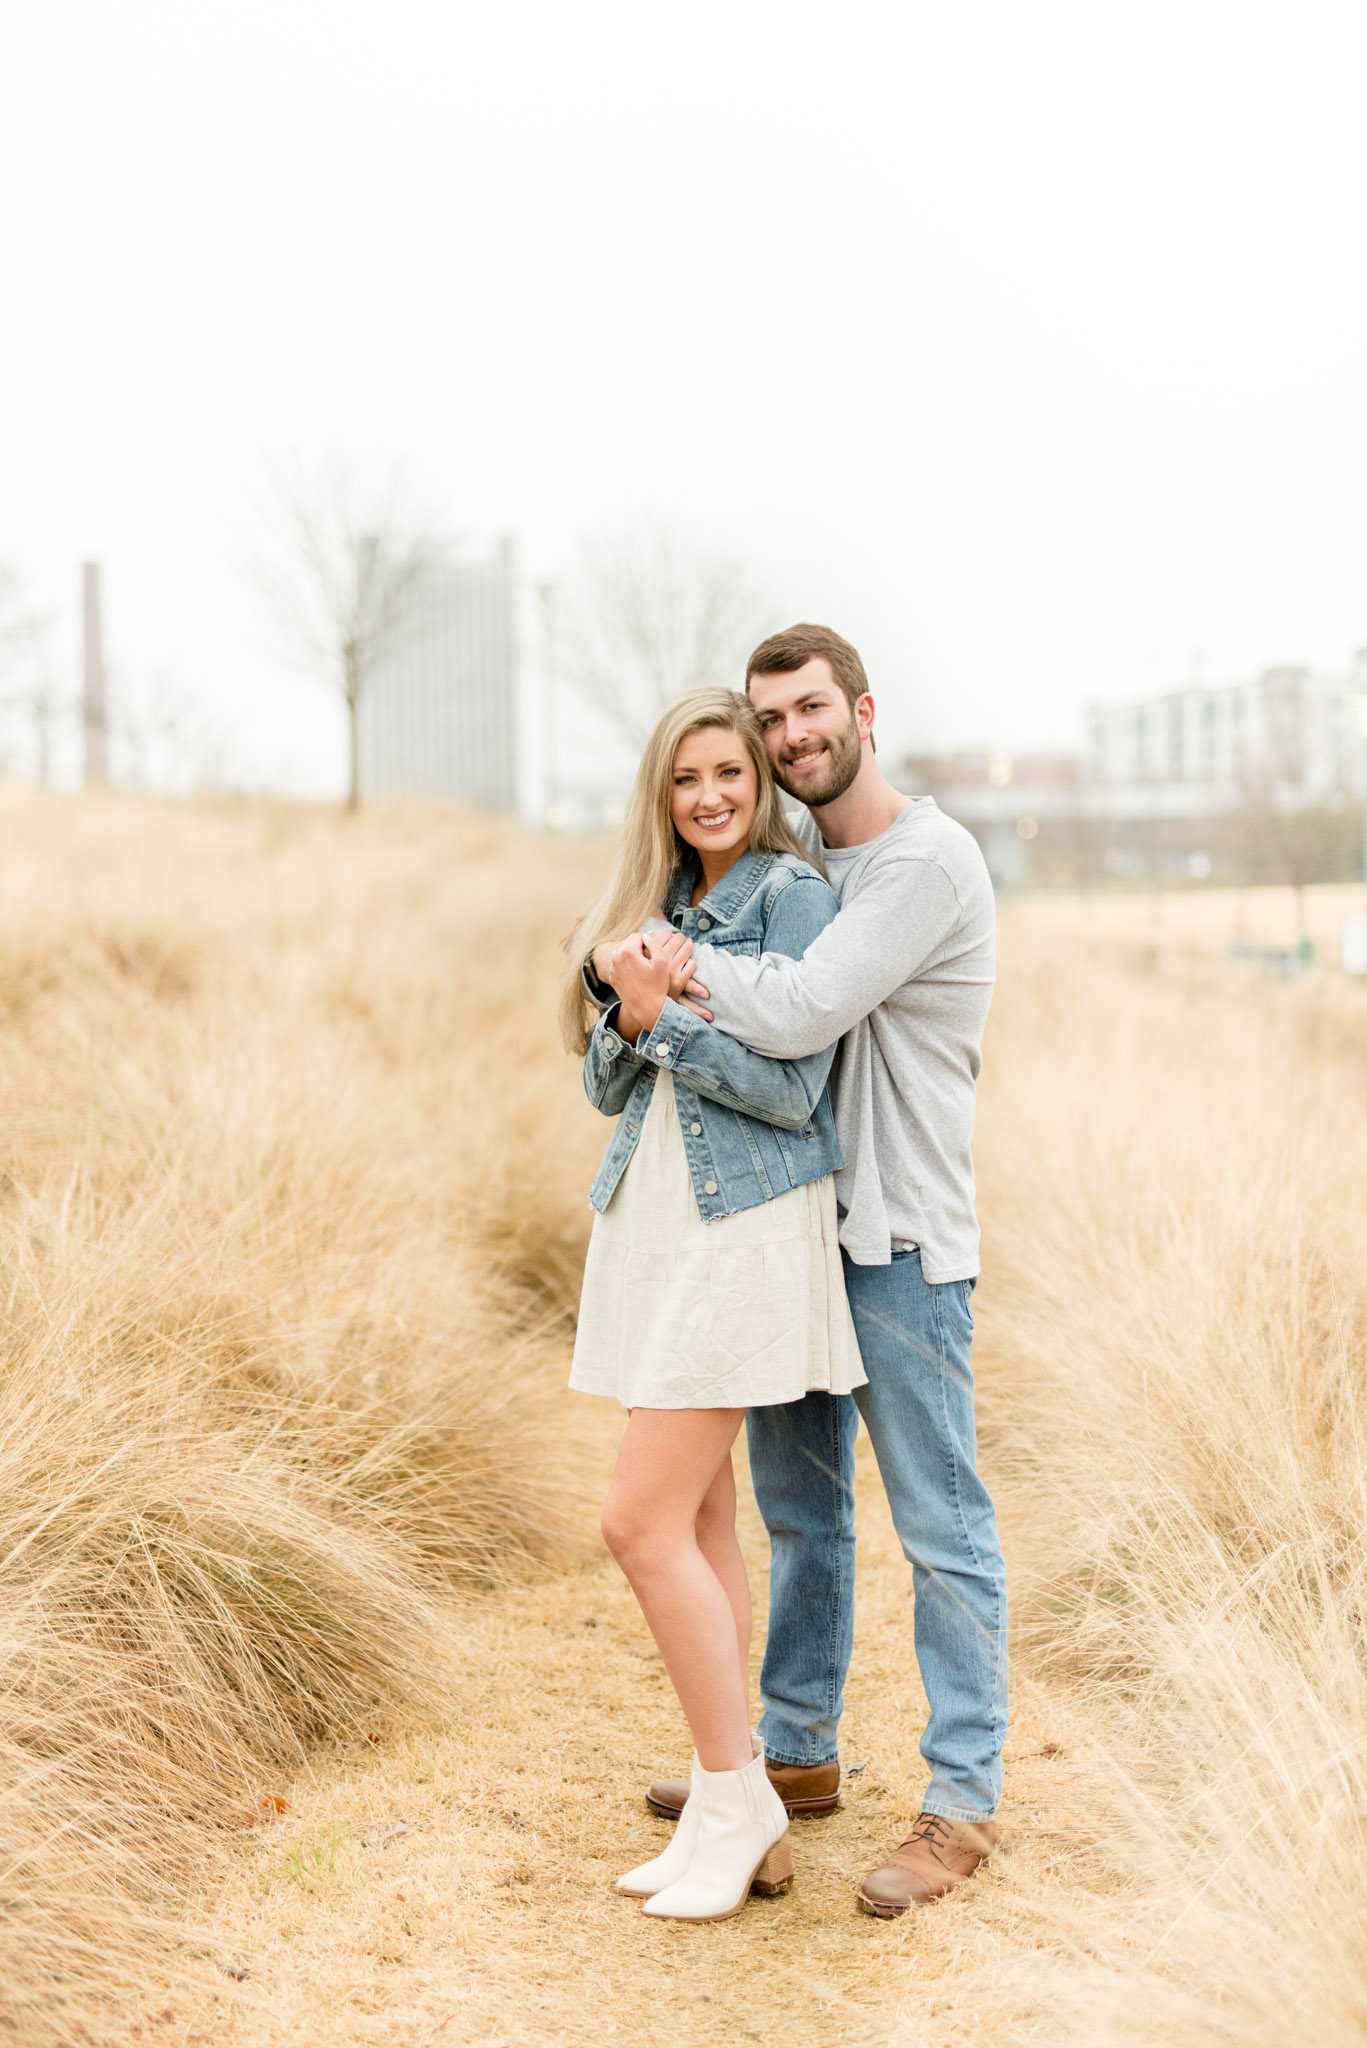 Couple stands in tall grass field and hugs.